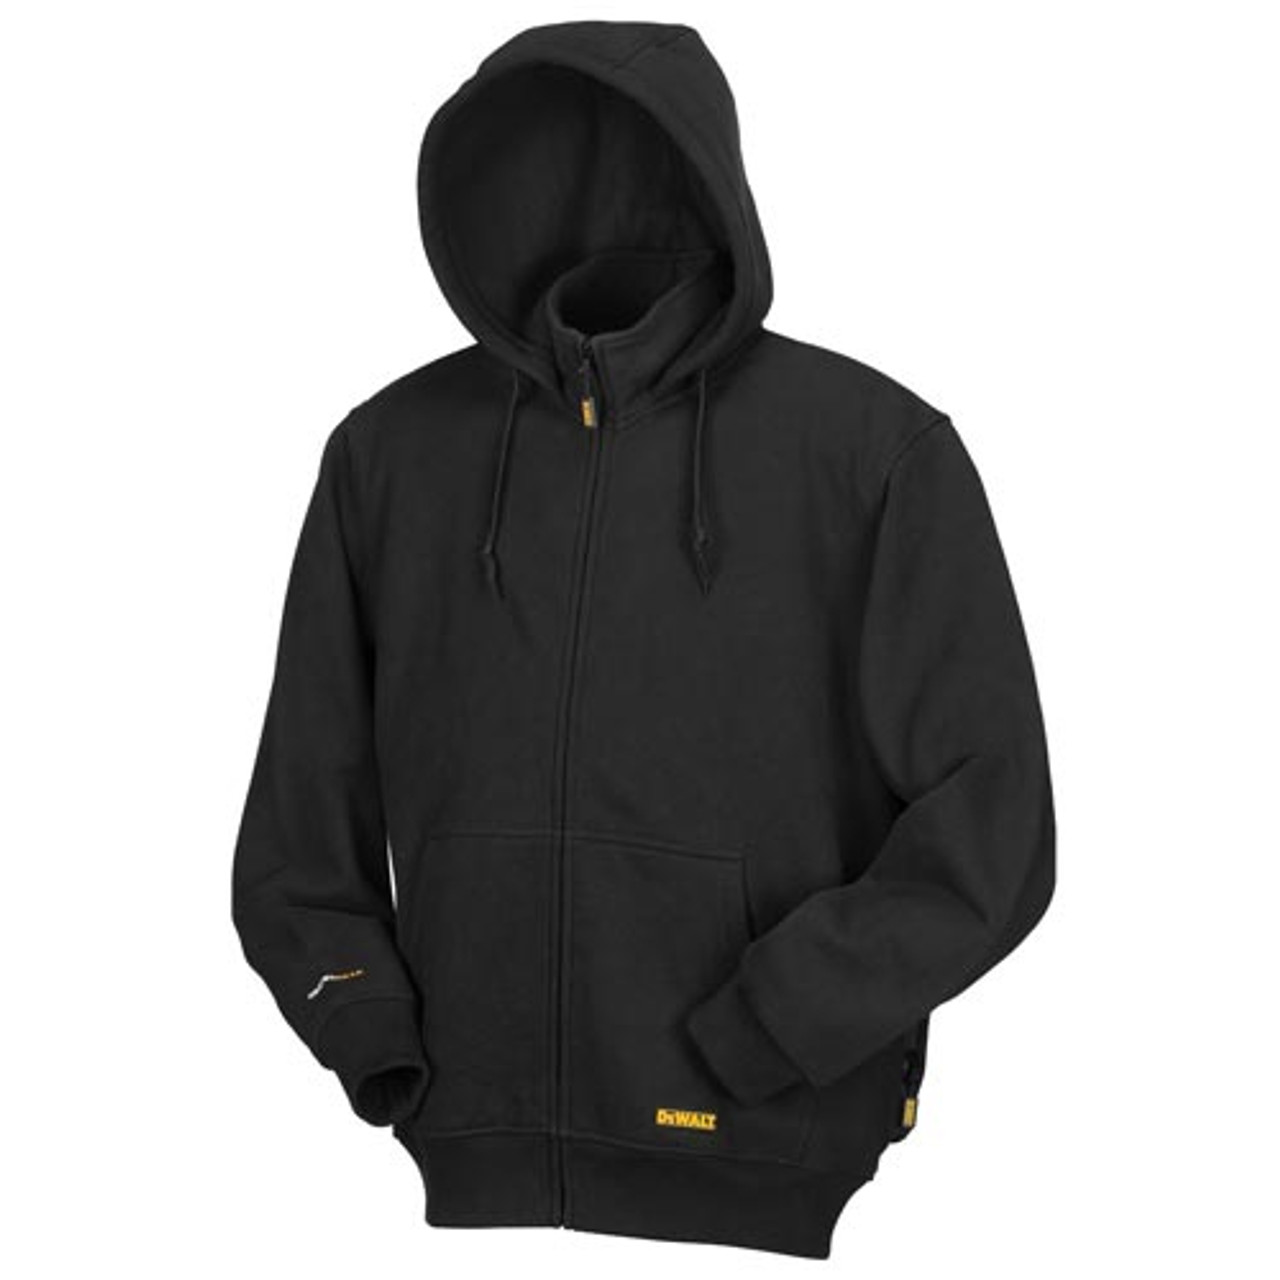 Hoodie Strings On Outer Layer